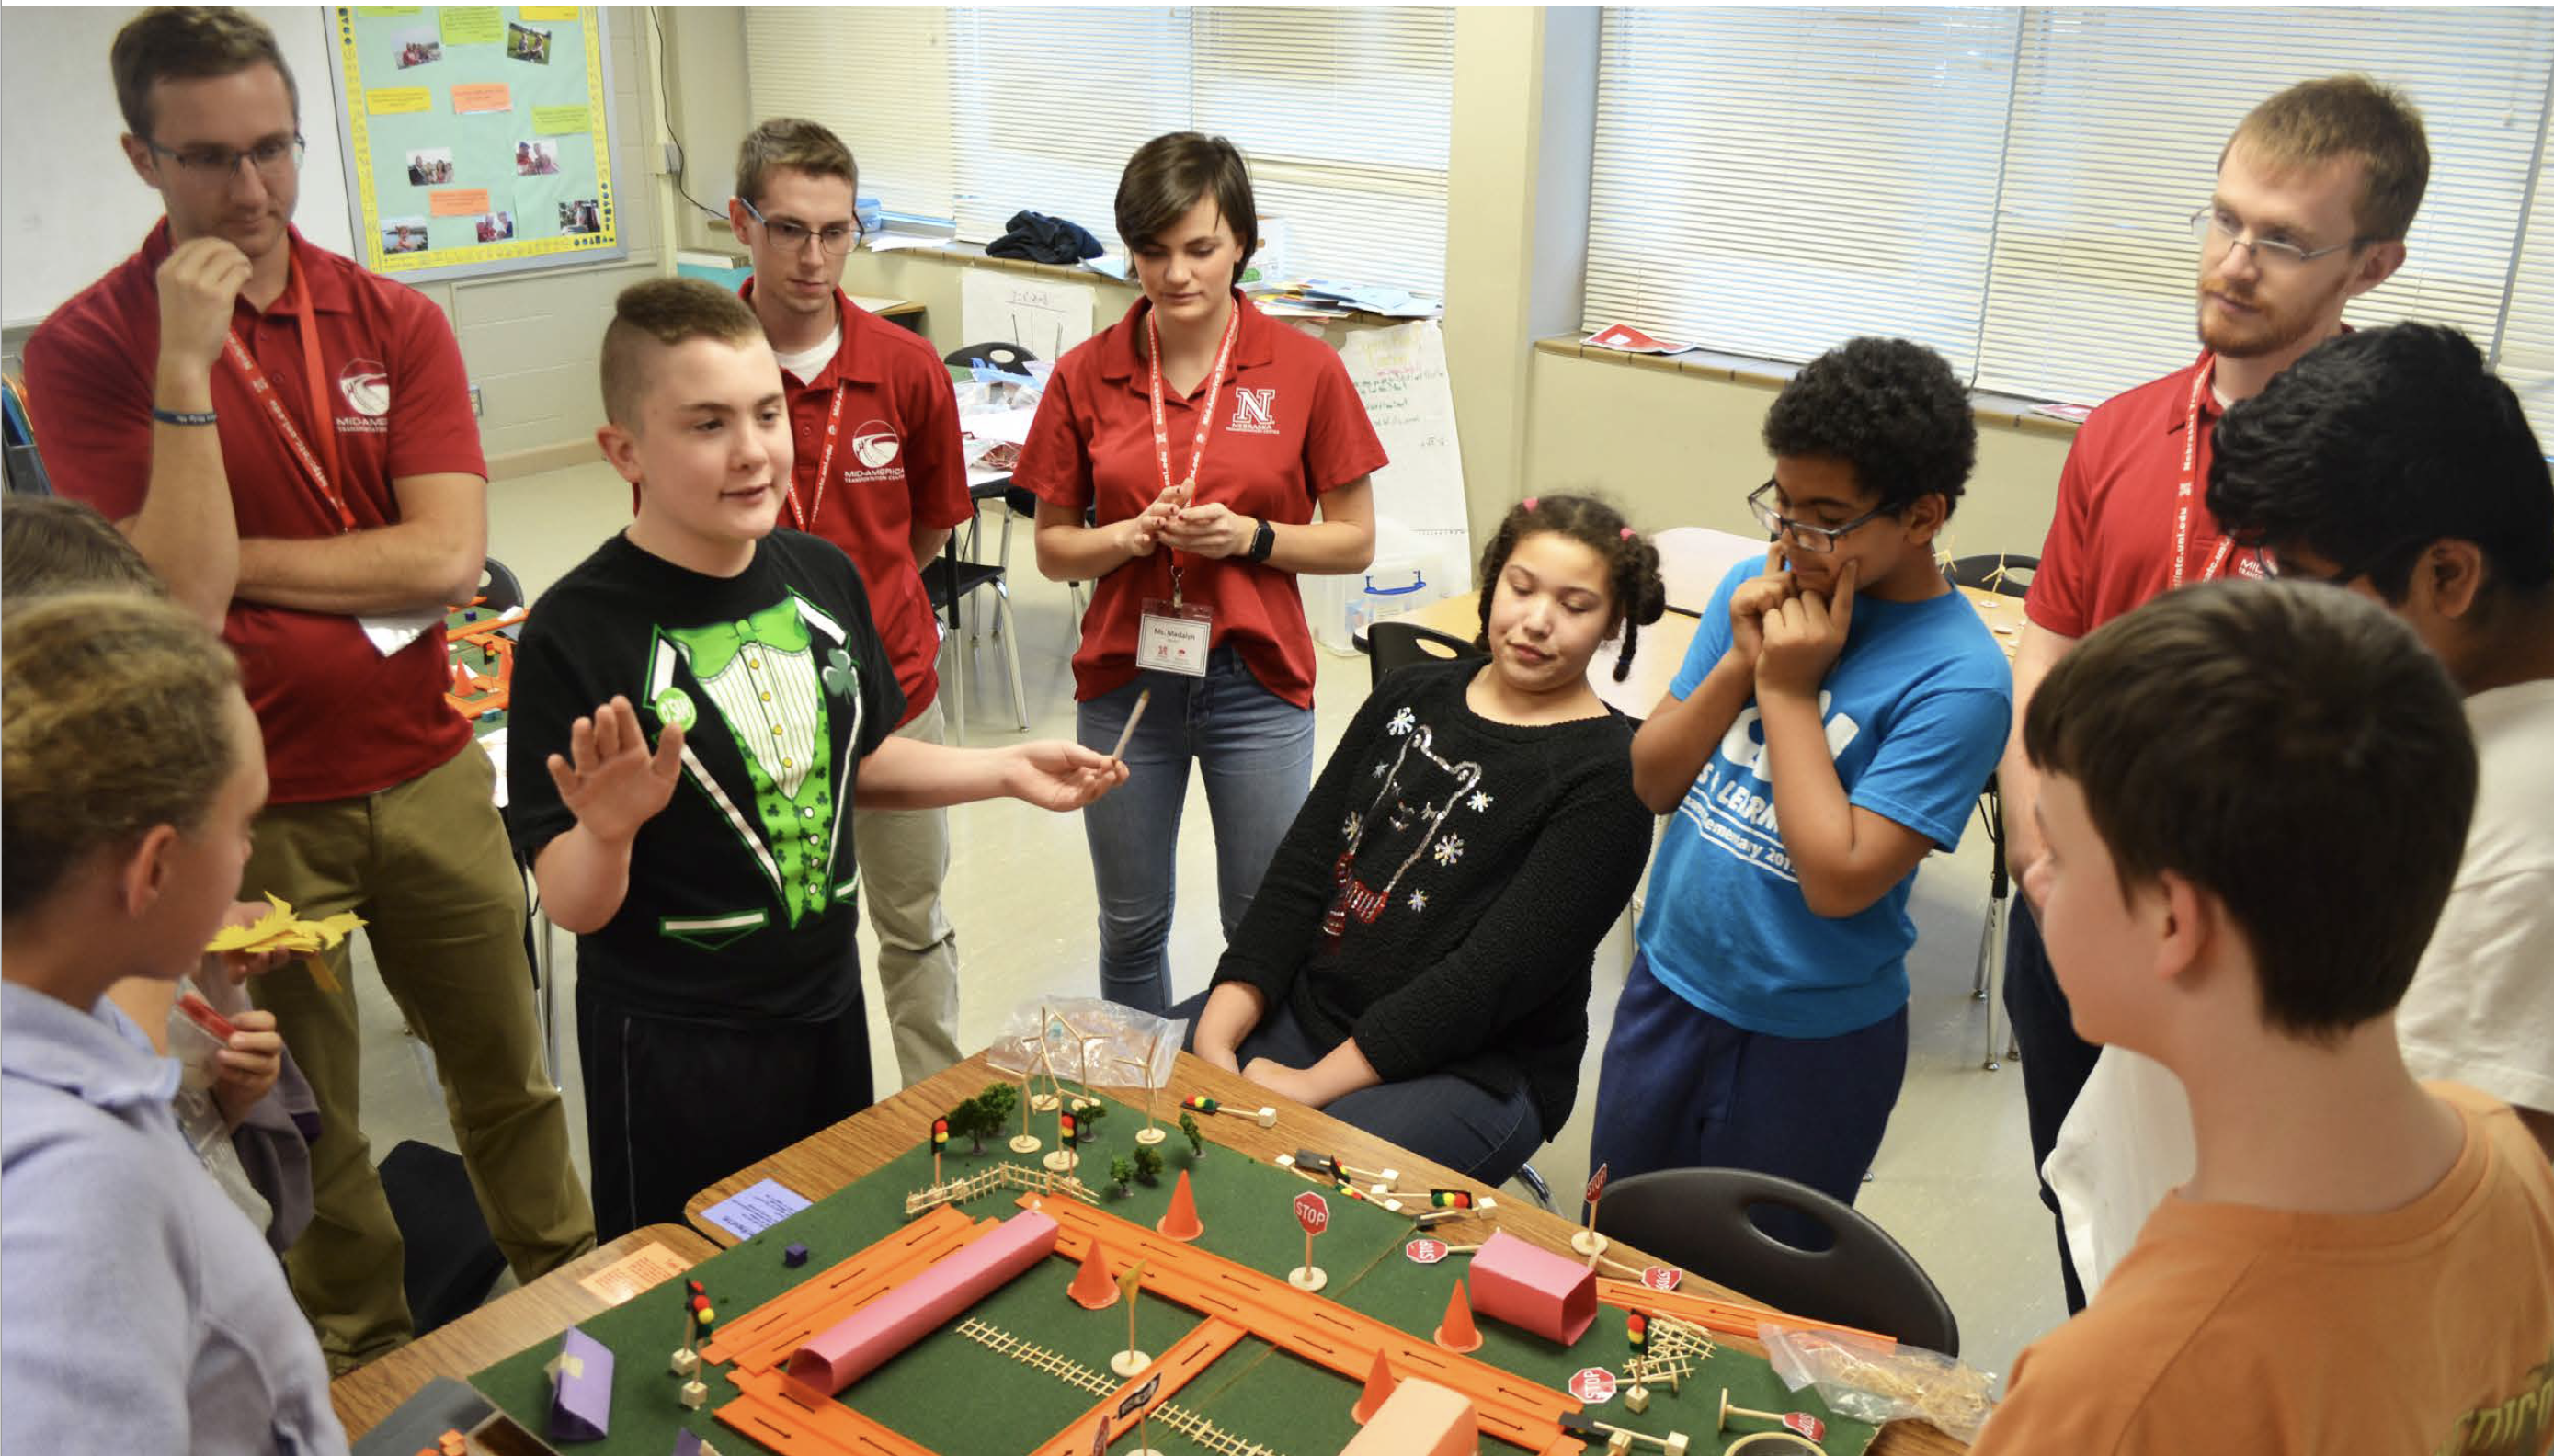 Roads, Rails, and Race Cars is an after-school K-12 program.